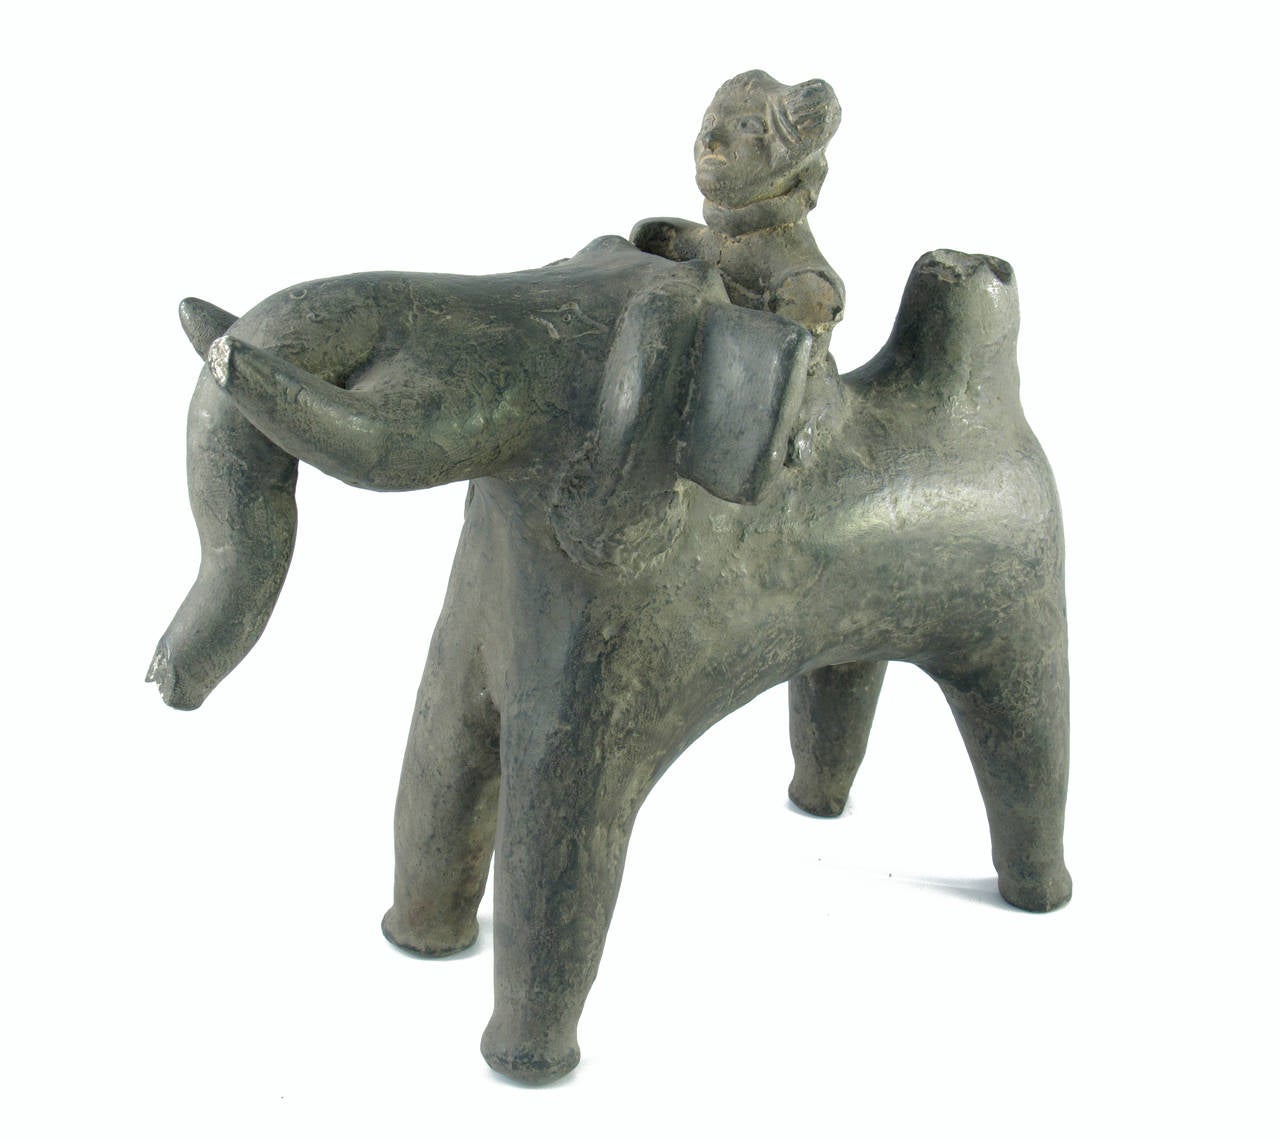 Fine example of an early terracotta elephant with rider from the Mauryan dynasty (3rd Century B.C.)